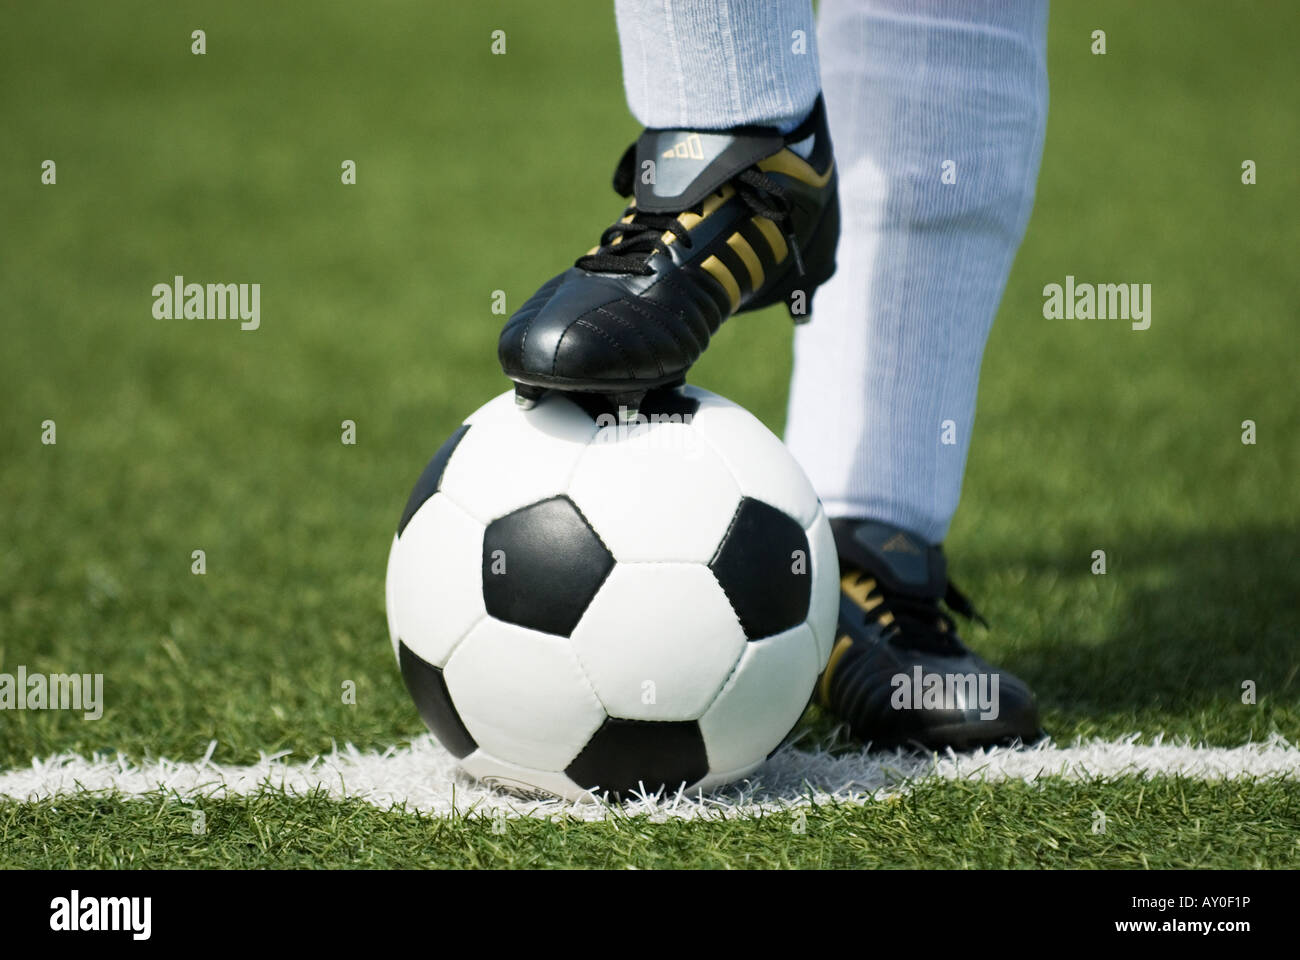 the feet of a football player in white stockings and a vintage black and white football Stock Photo